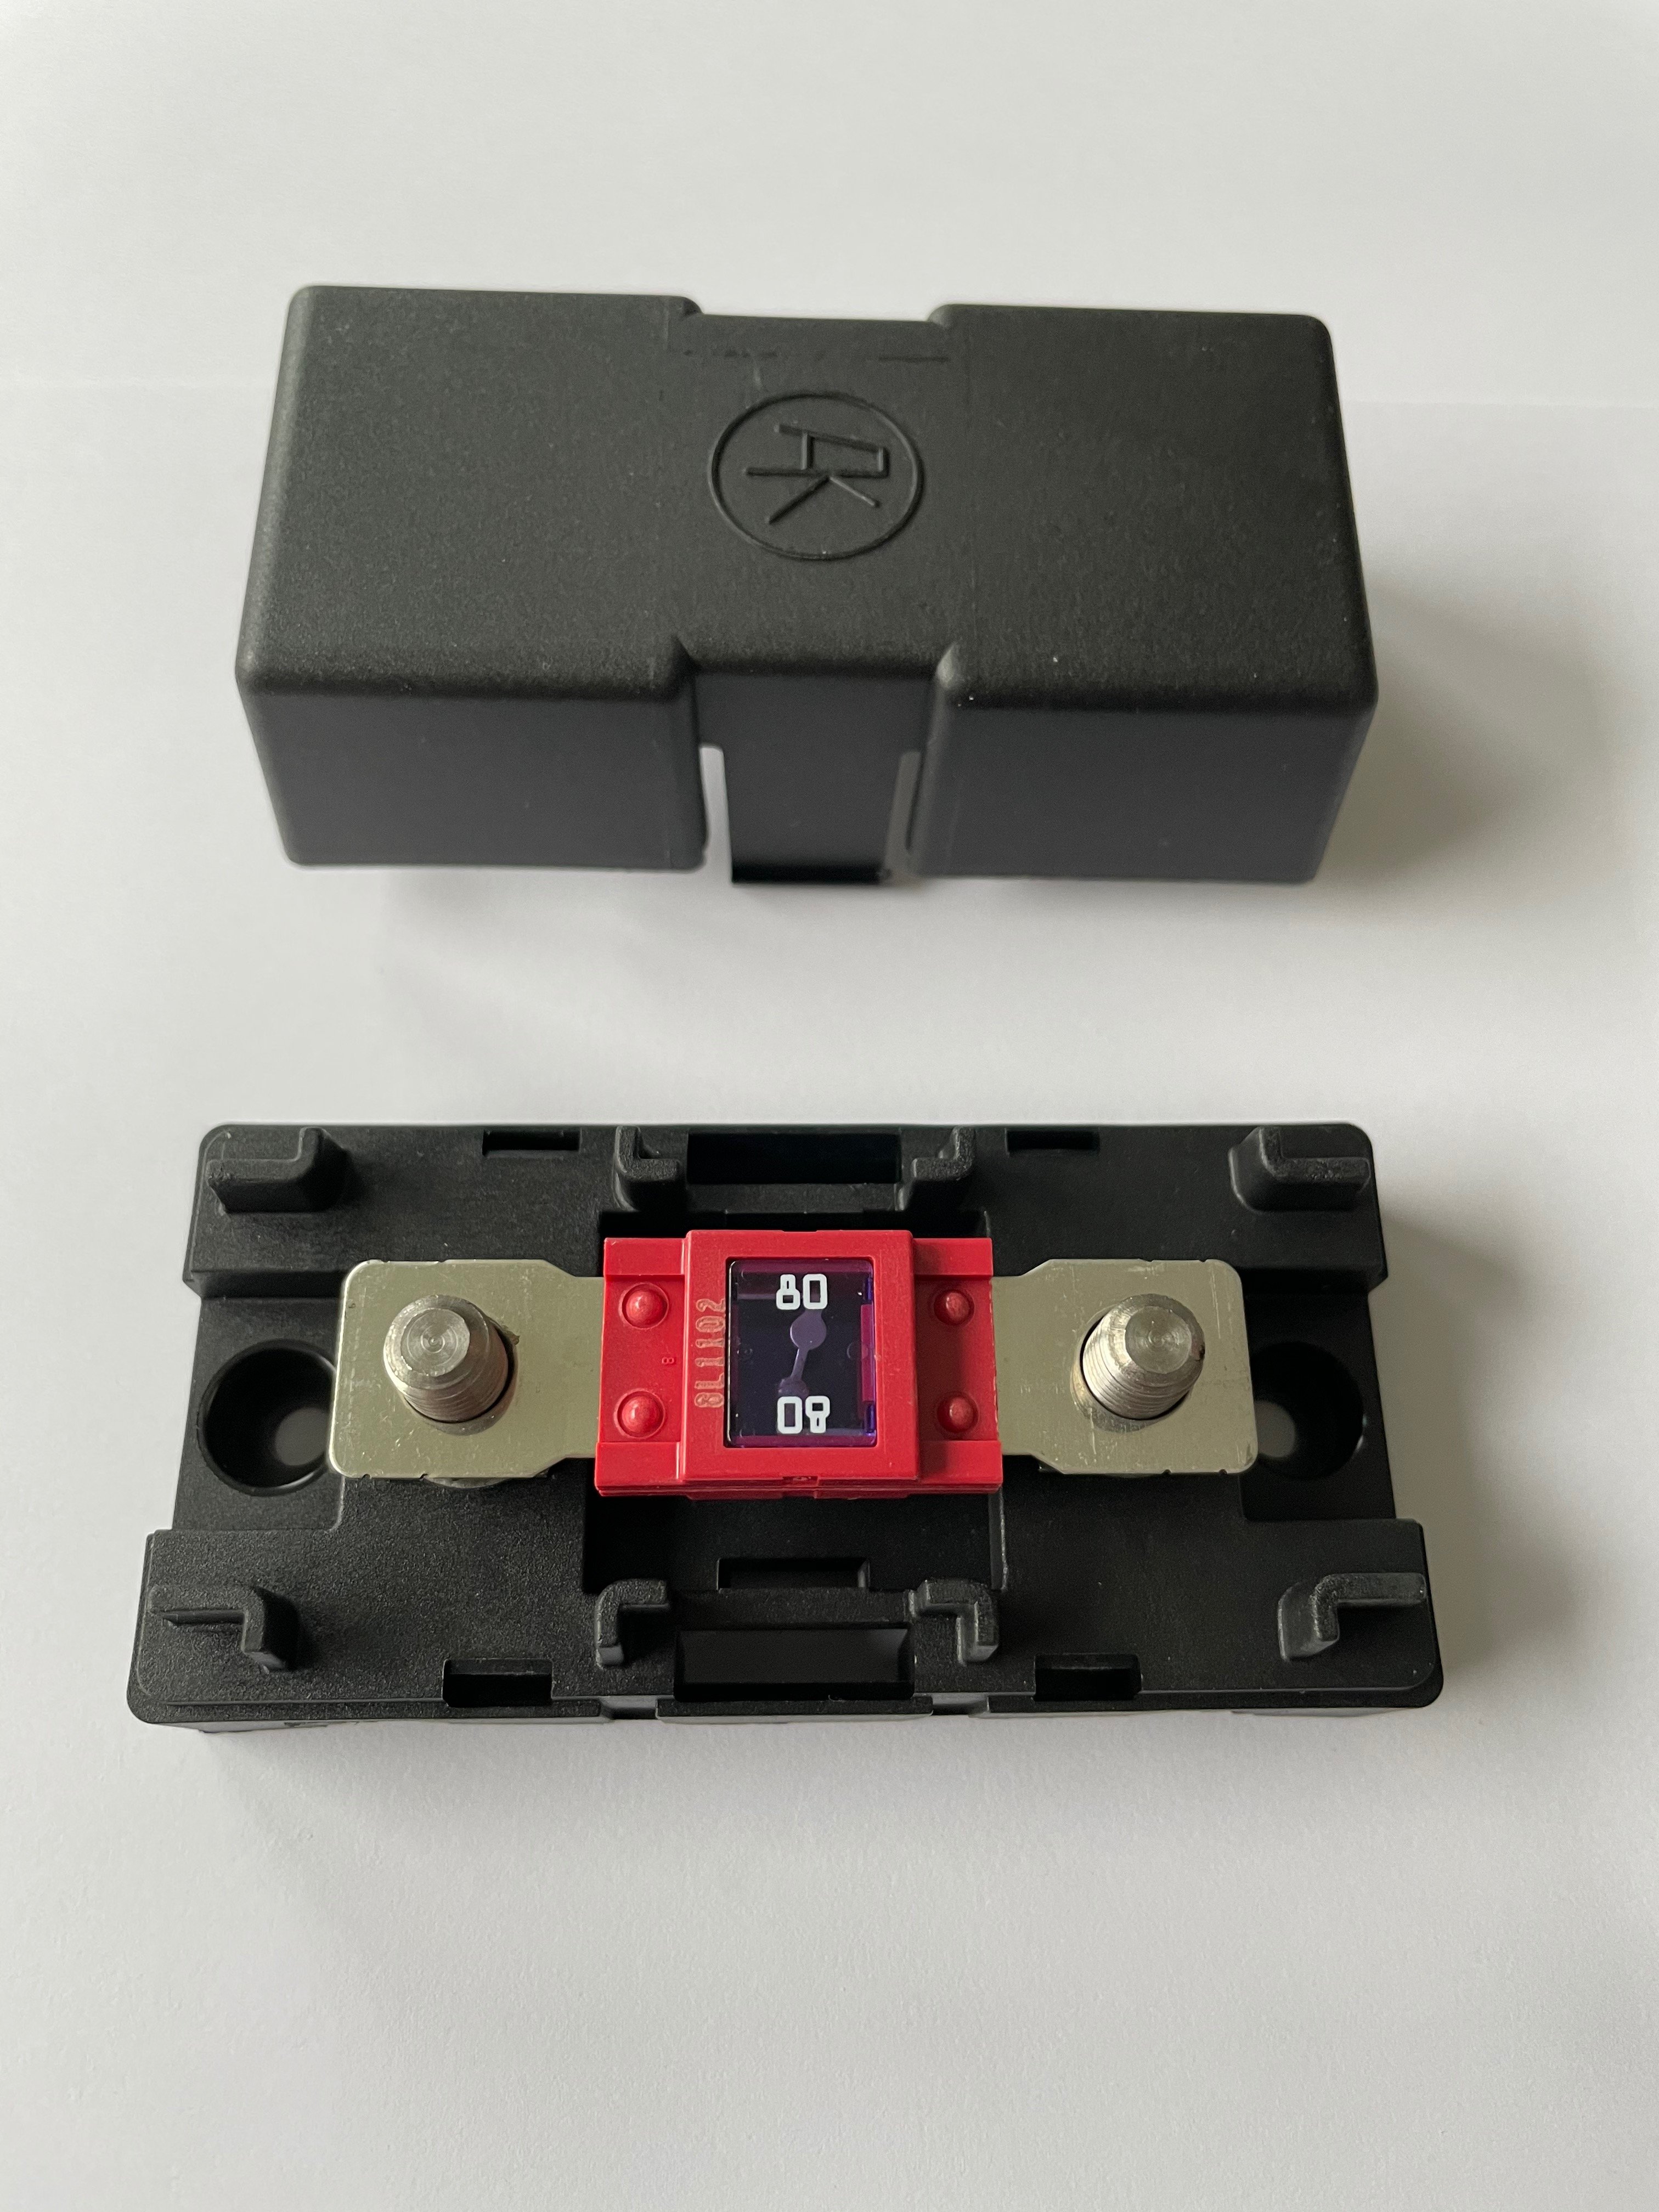 Heavy duty fuse holder with cover for MEGA / AMG fuses